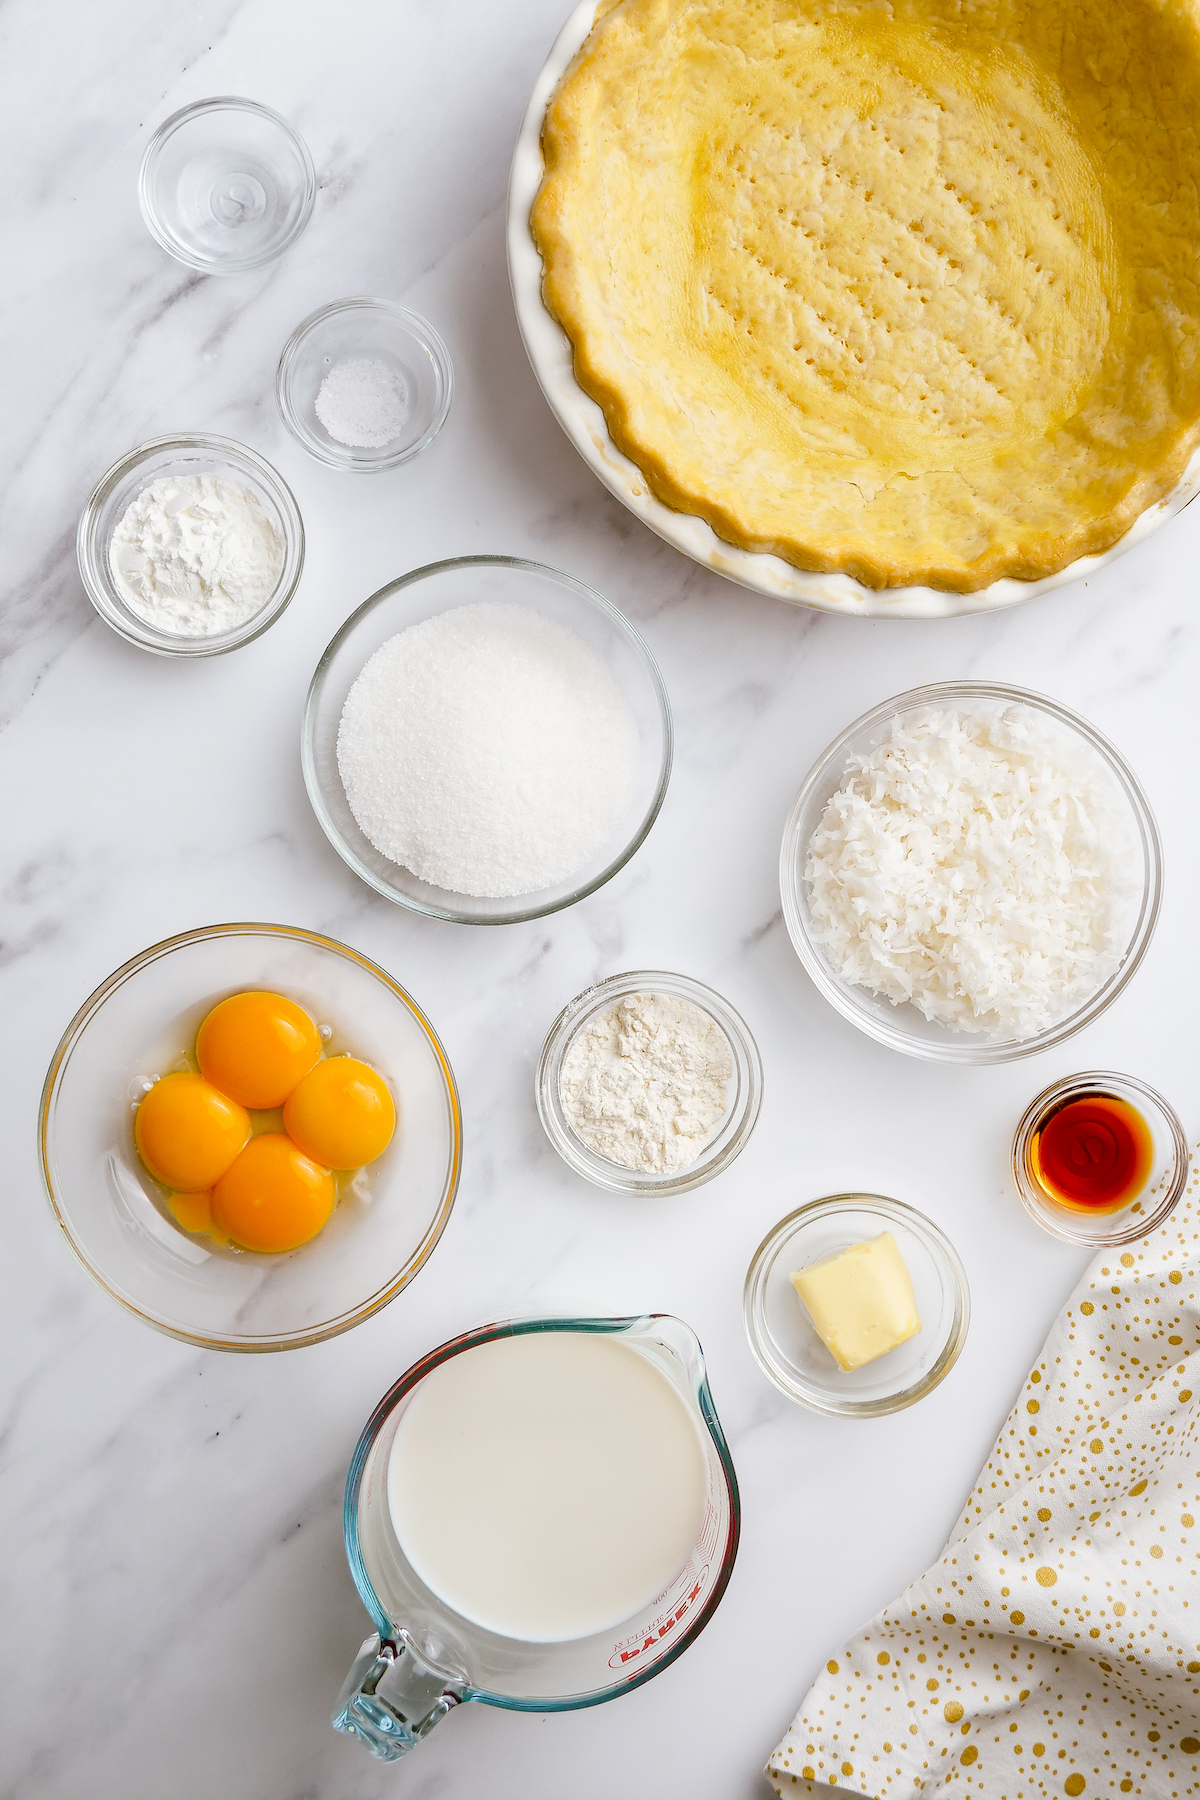 Clockwise from top: a baked pie crust, a bowl of sweetened shredded coconut, vanilla extract, butter, whole milk, egg yolks, flour, sugar, cornstarch, and coconut extract.